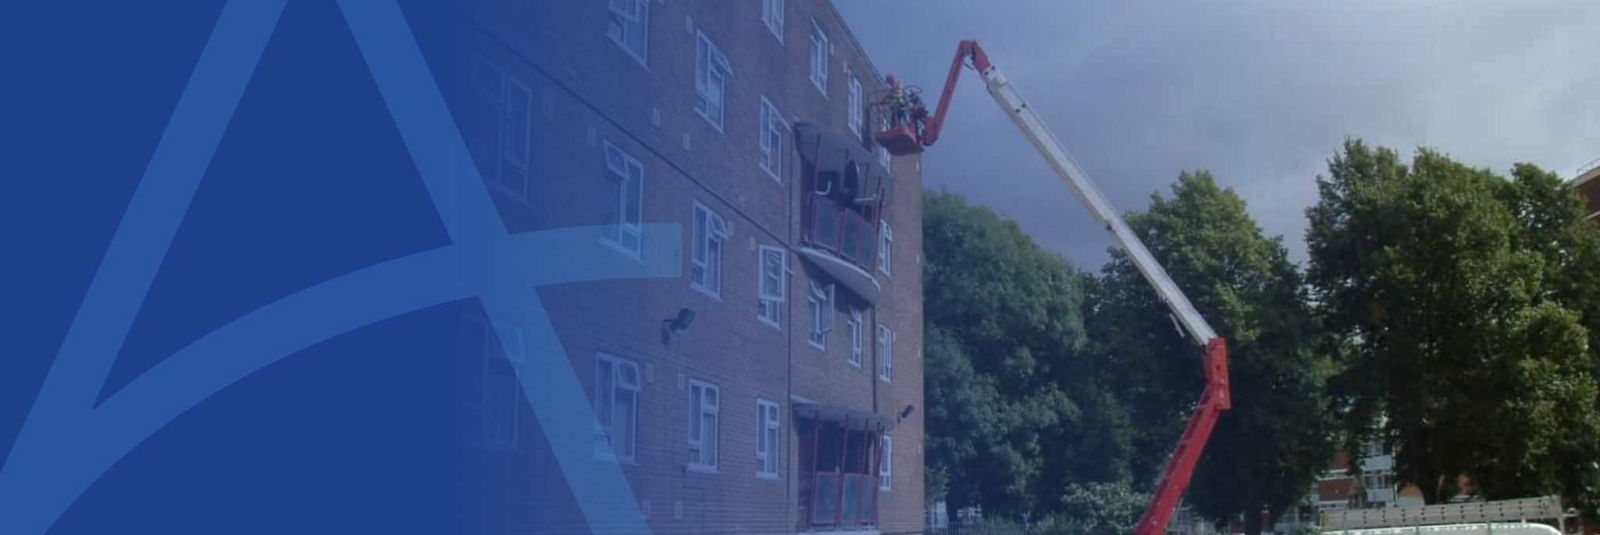 banner image showing cherry picker being used for structural repair work